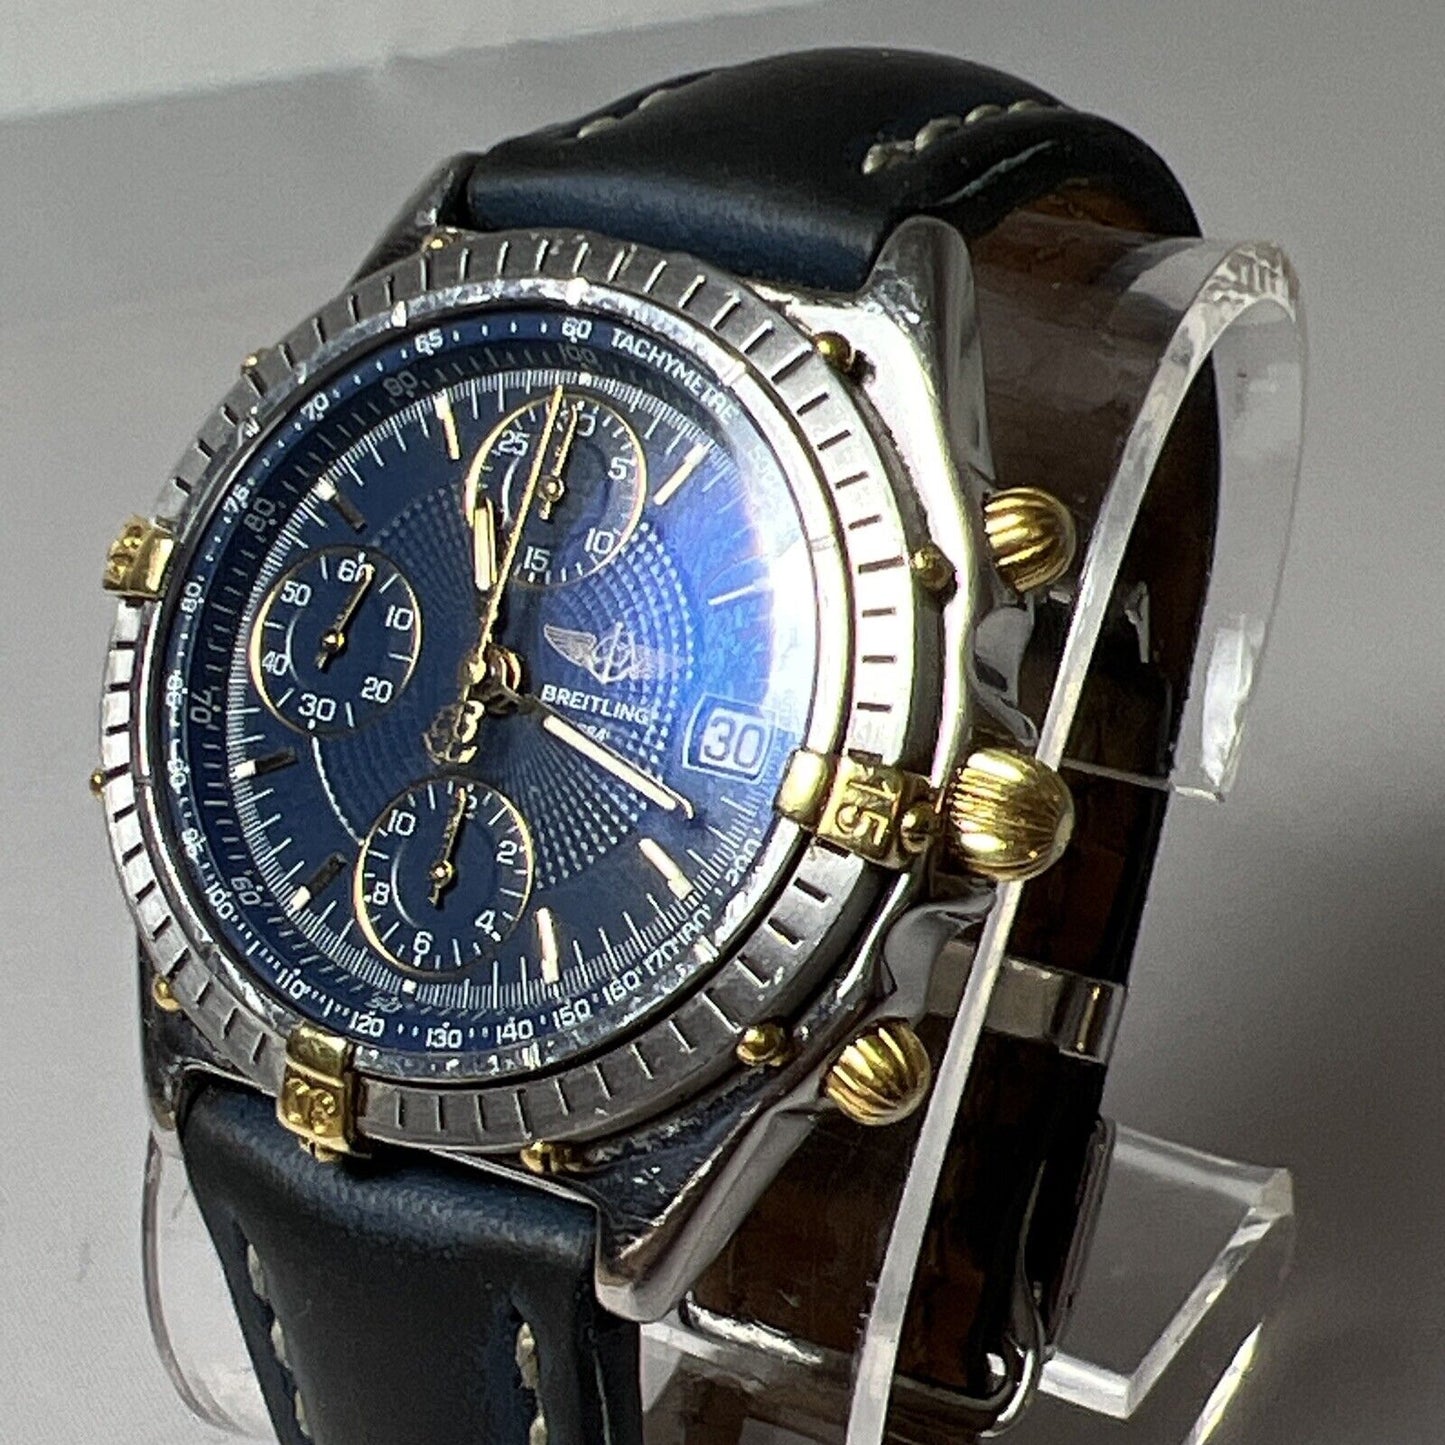 Two-Tone Blue Dial Breitling 39mm 81950 Chronograph Automatic Date Watch - READ